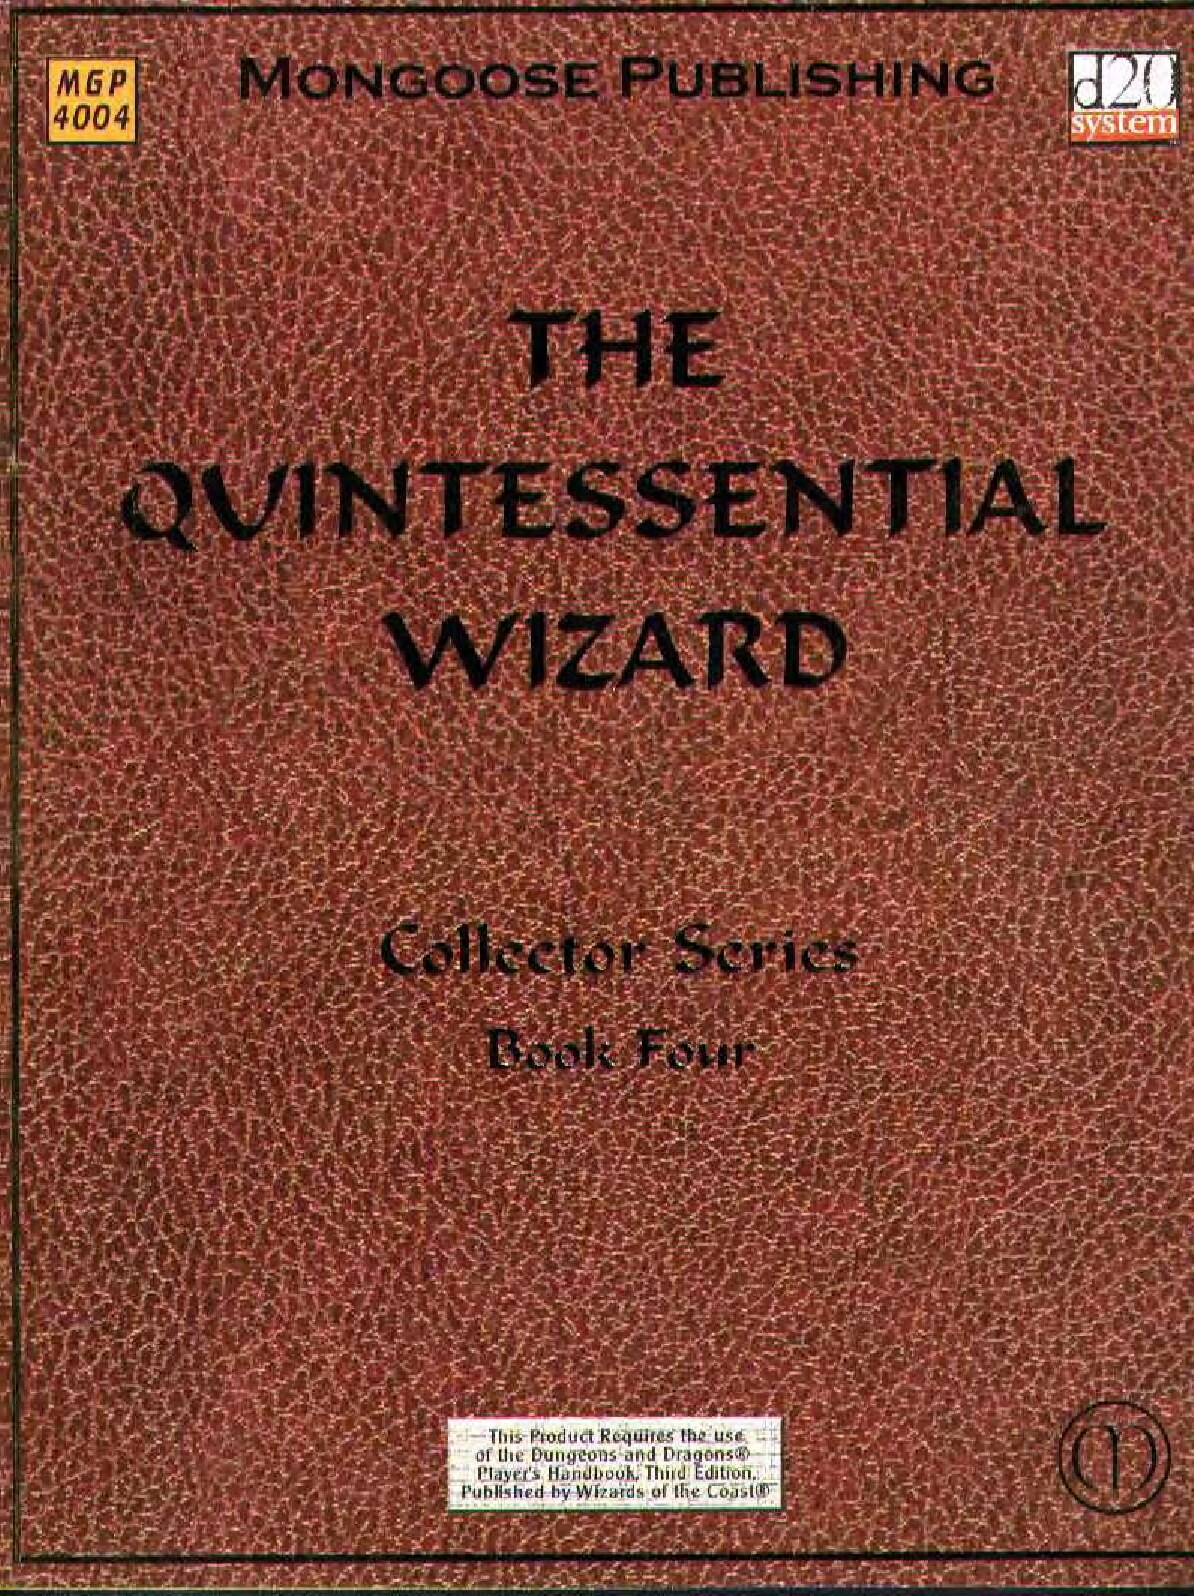 The Quintessential Wizard